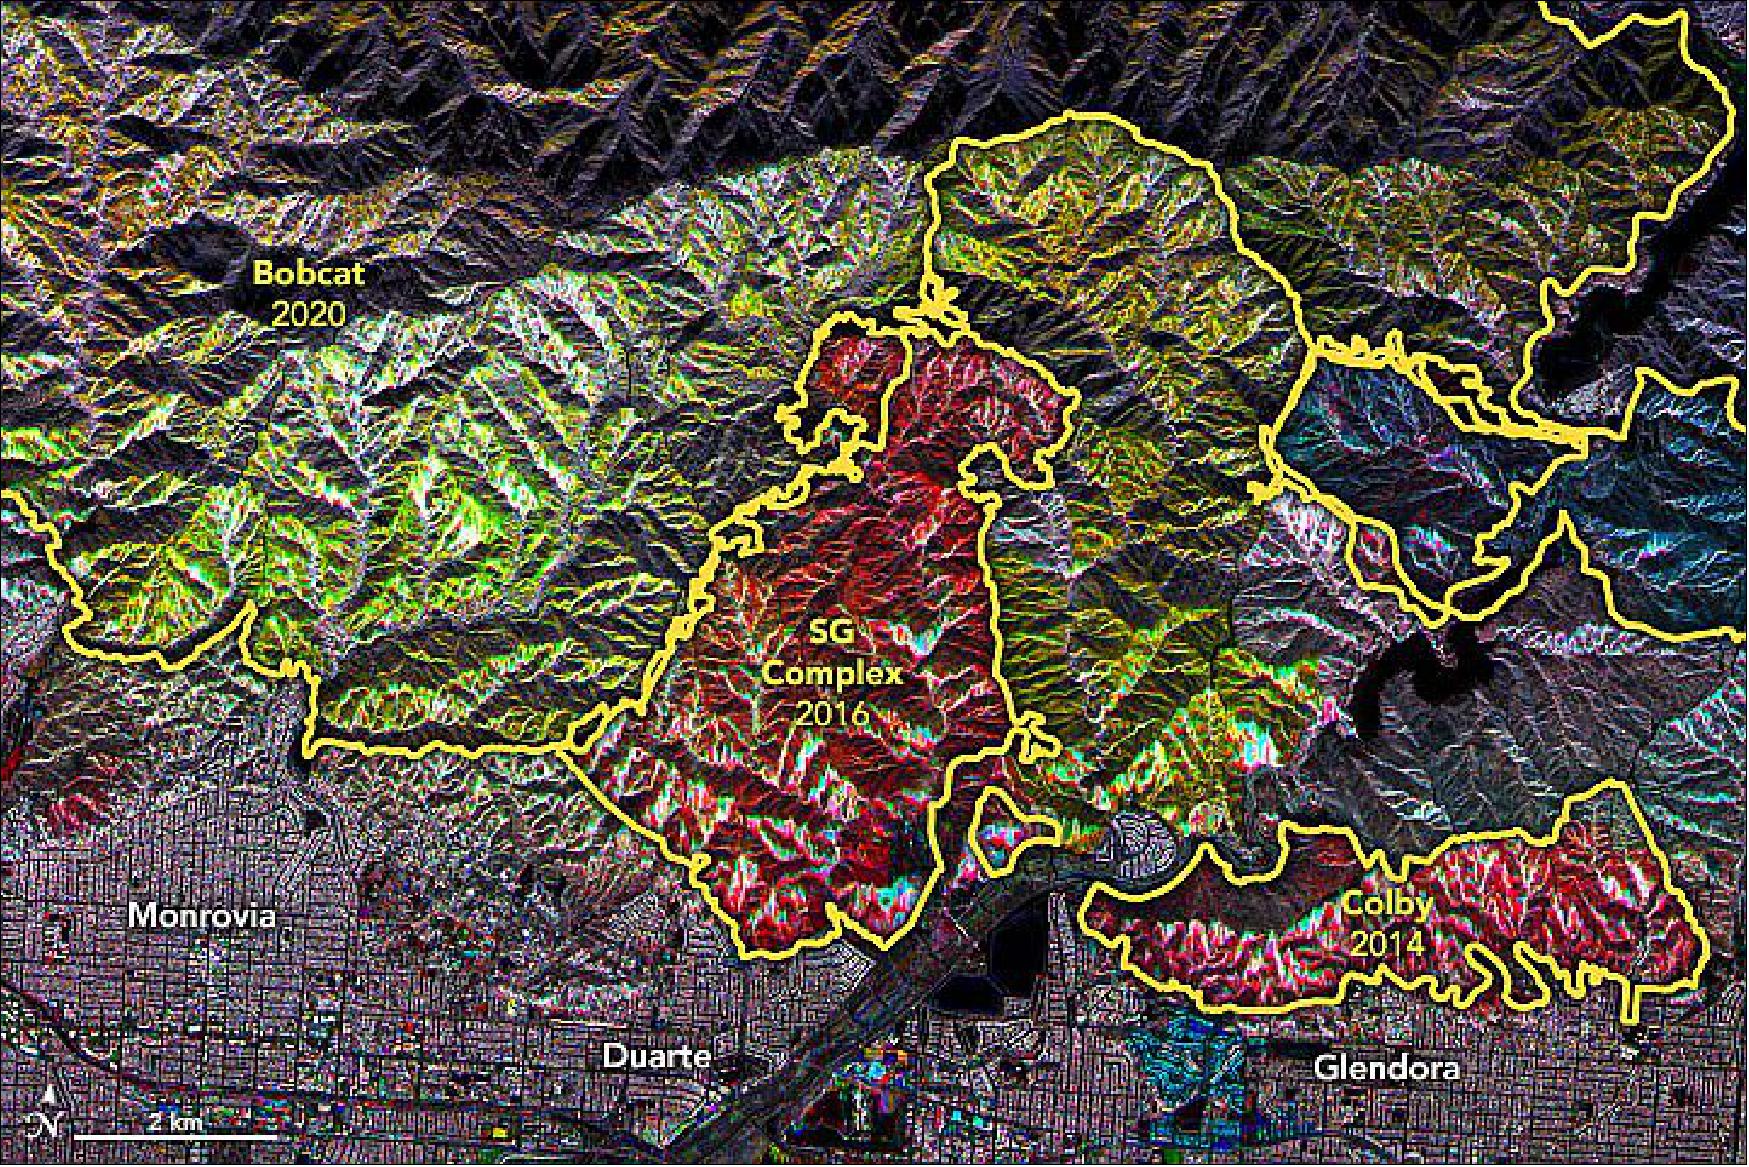 Figure 5: The maps are essentially mosaics of the observations across a decade. Radar signals bounce off burned, barren terrain differently than they reflect from unburned, brush-covered hillsides or from fresh growth. The colors indicate the relative amount of vegetation observed by different UAVSAR flights at different times. Yellow lines on the maps indicate the extent of several major fires: Station, Colby, San Gabriel (SG) Complex, La Tuna, and Bobcat (image credit: NASA Earth Observatory)